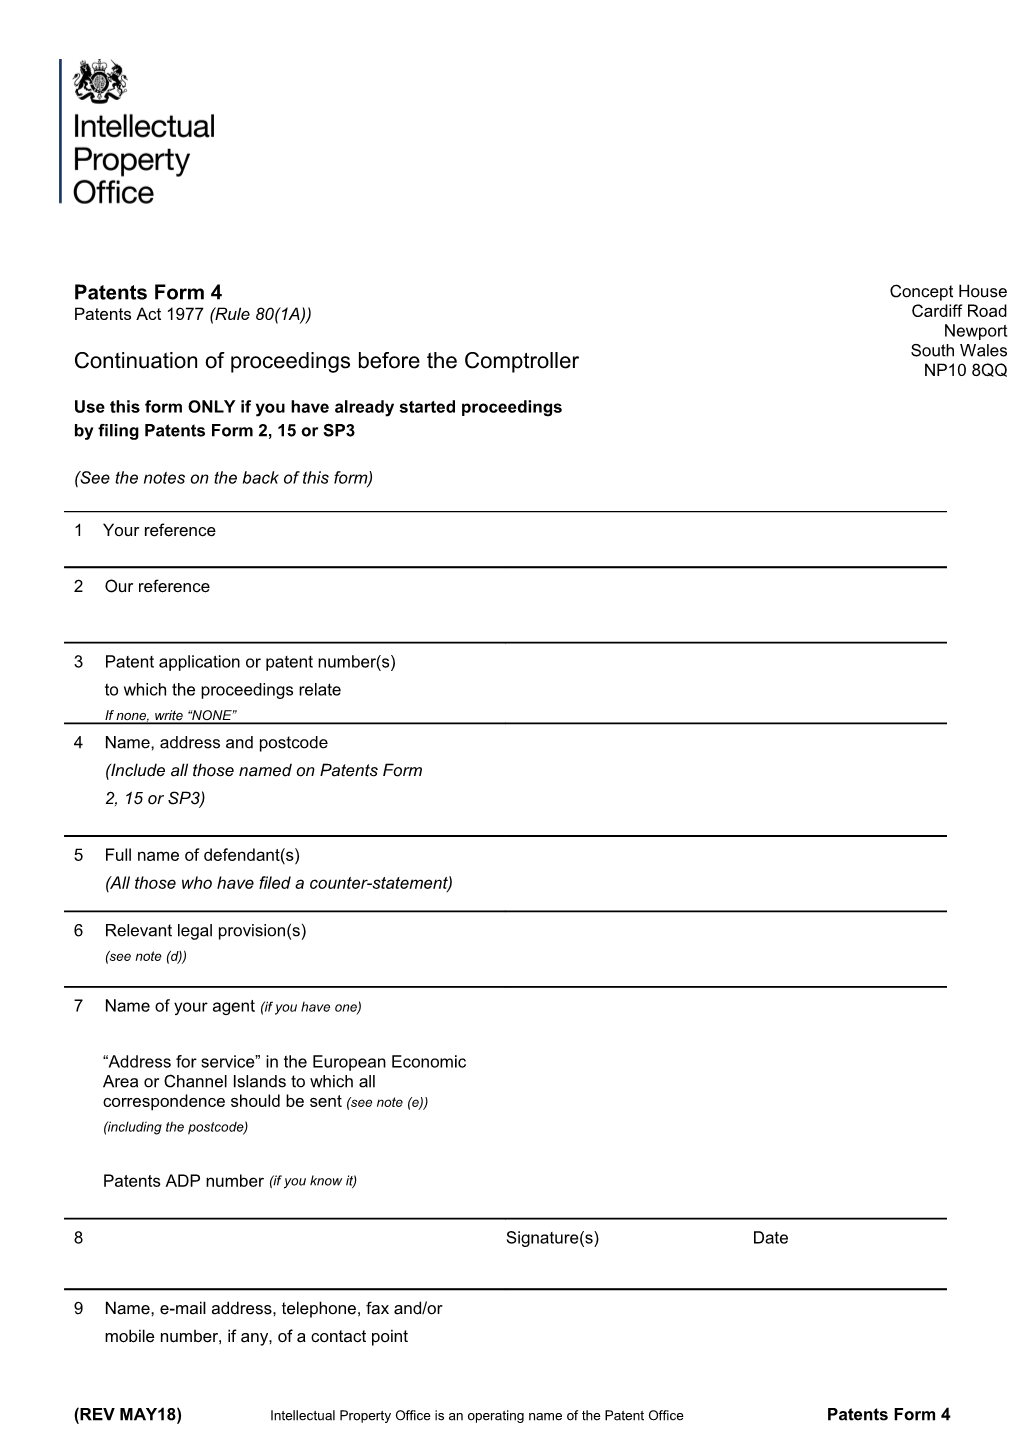 Use This Form ONLY If You Have Already Started Proceedings